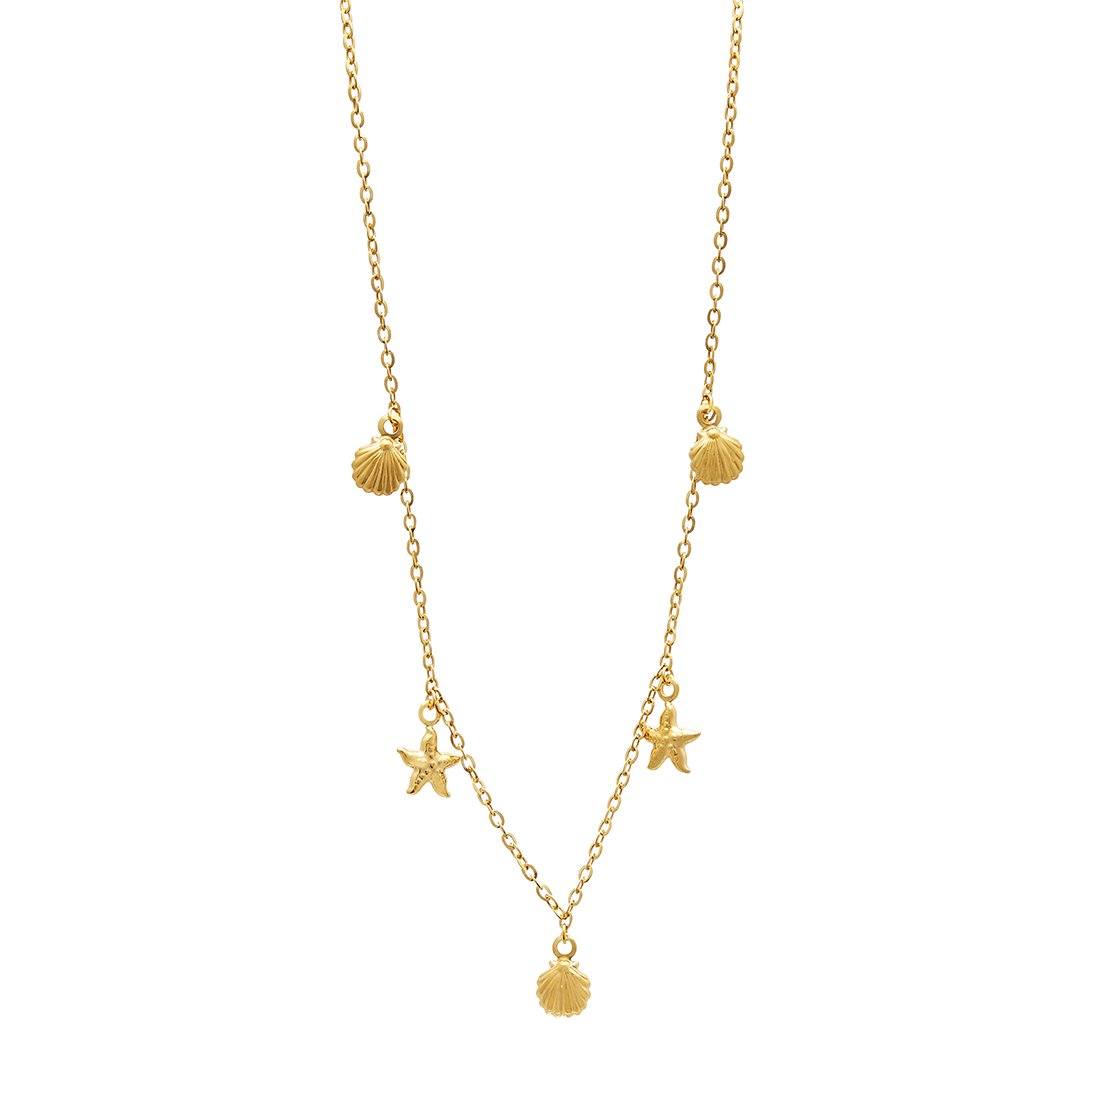 Children's Starfish & Shells Necklace in 9ct Yellow Gold Silver Infused Necklaces Bevilles 